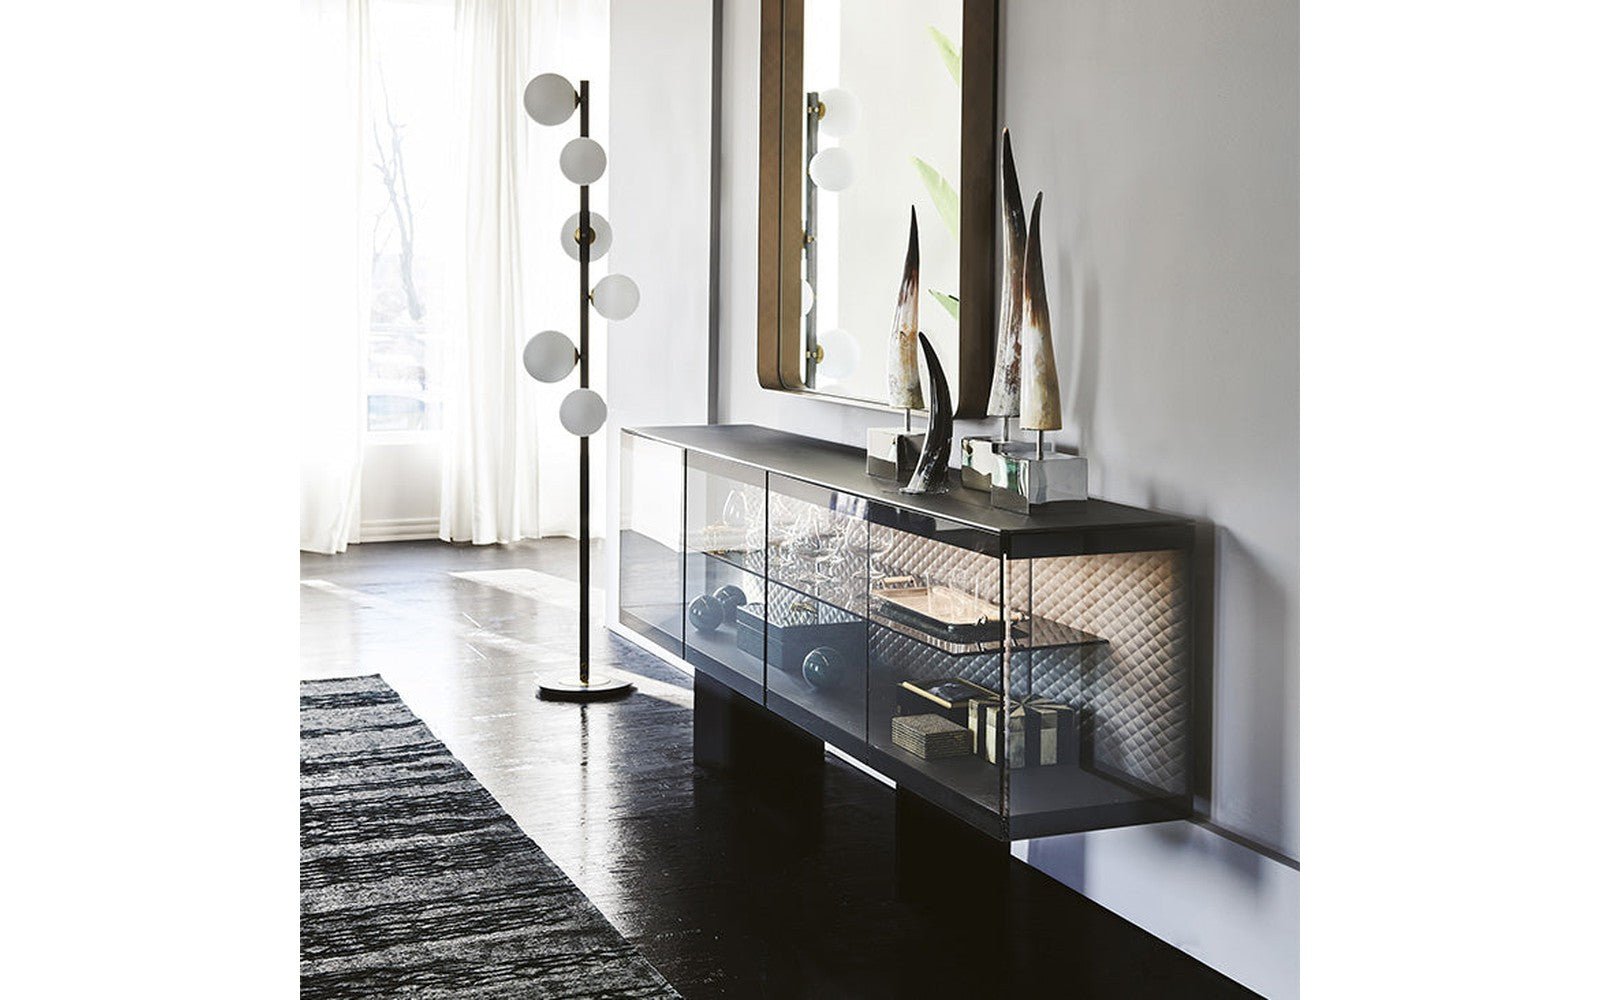 Boutique Sideboard